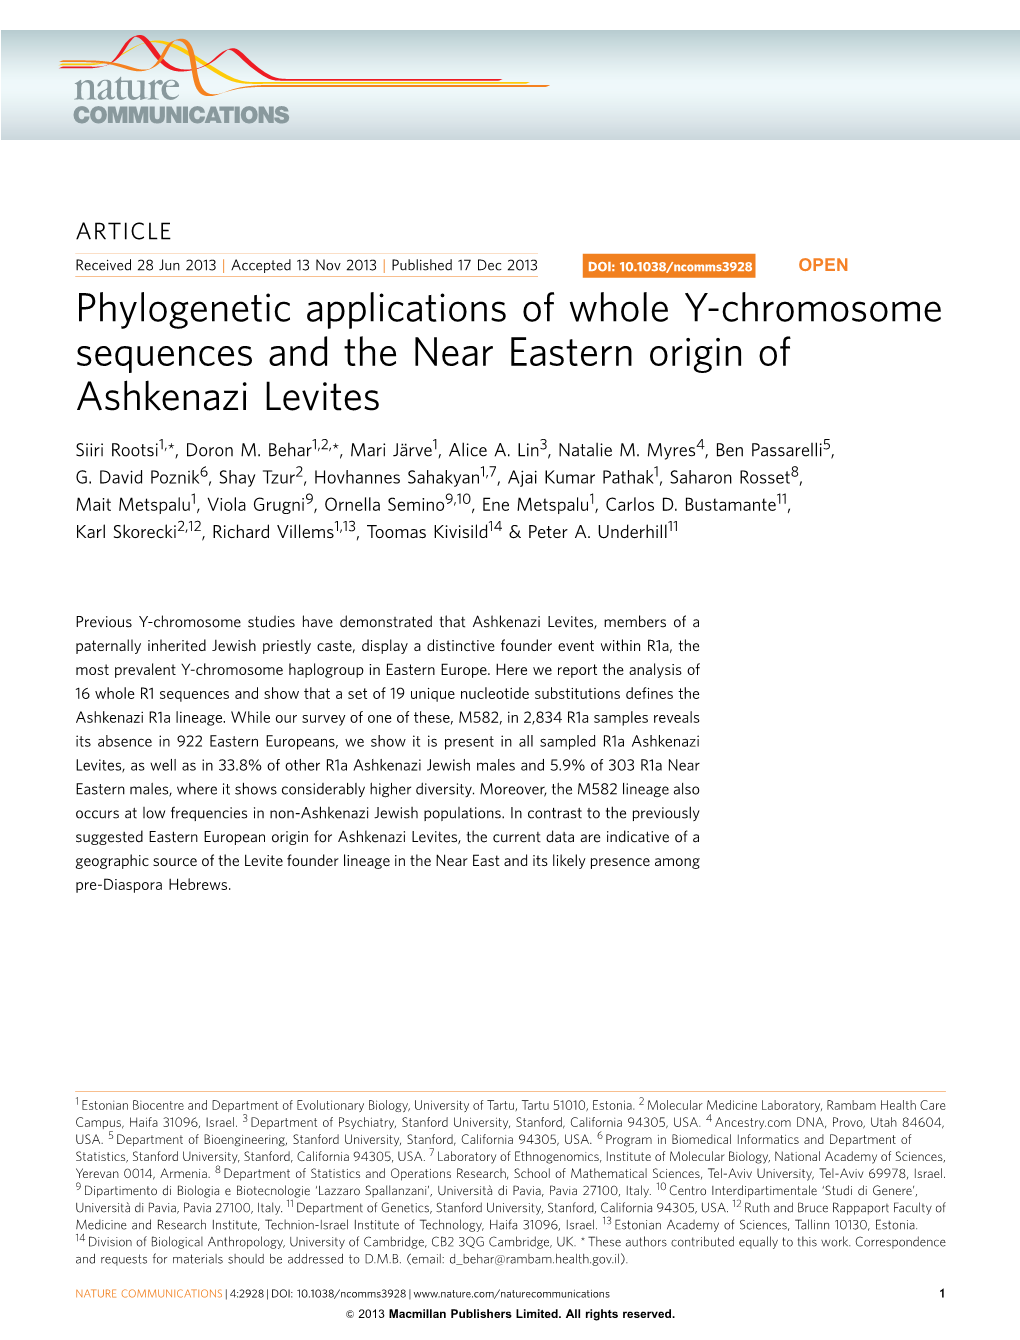 Phylogenetic Applications of Whole Y-Chromosome Sequences and the Near Eastern Origin of Ashkenazi Levites